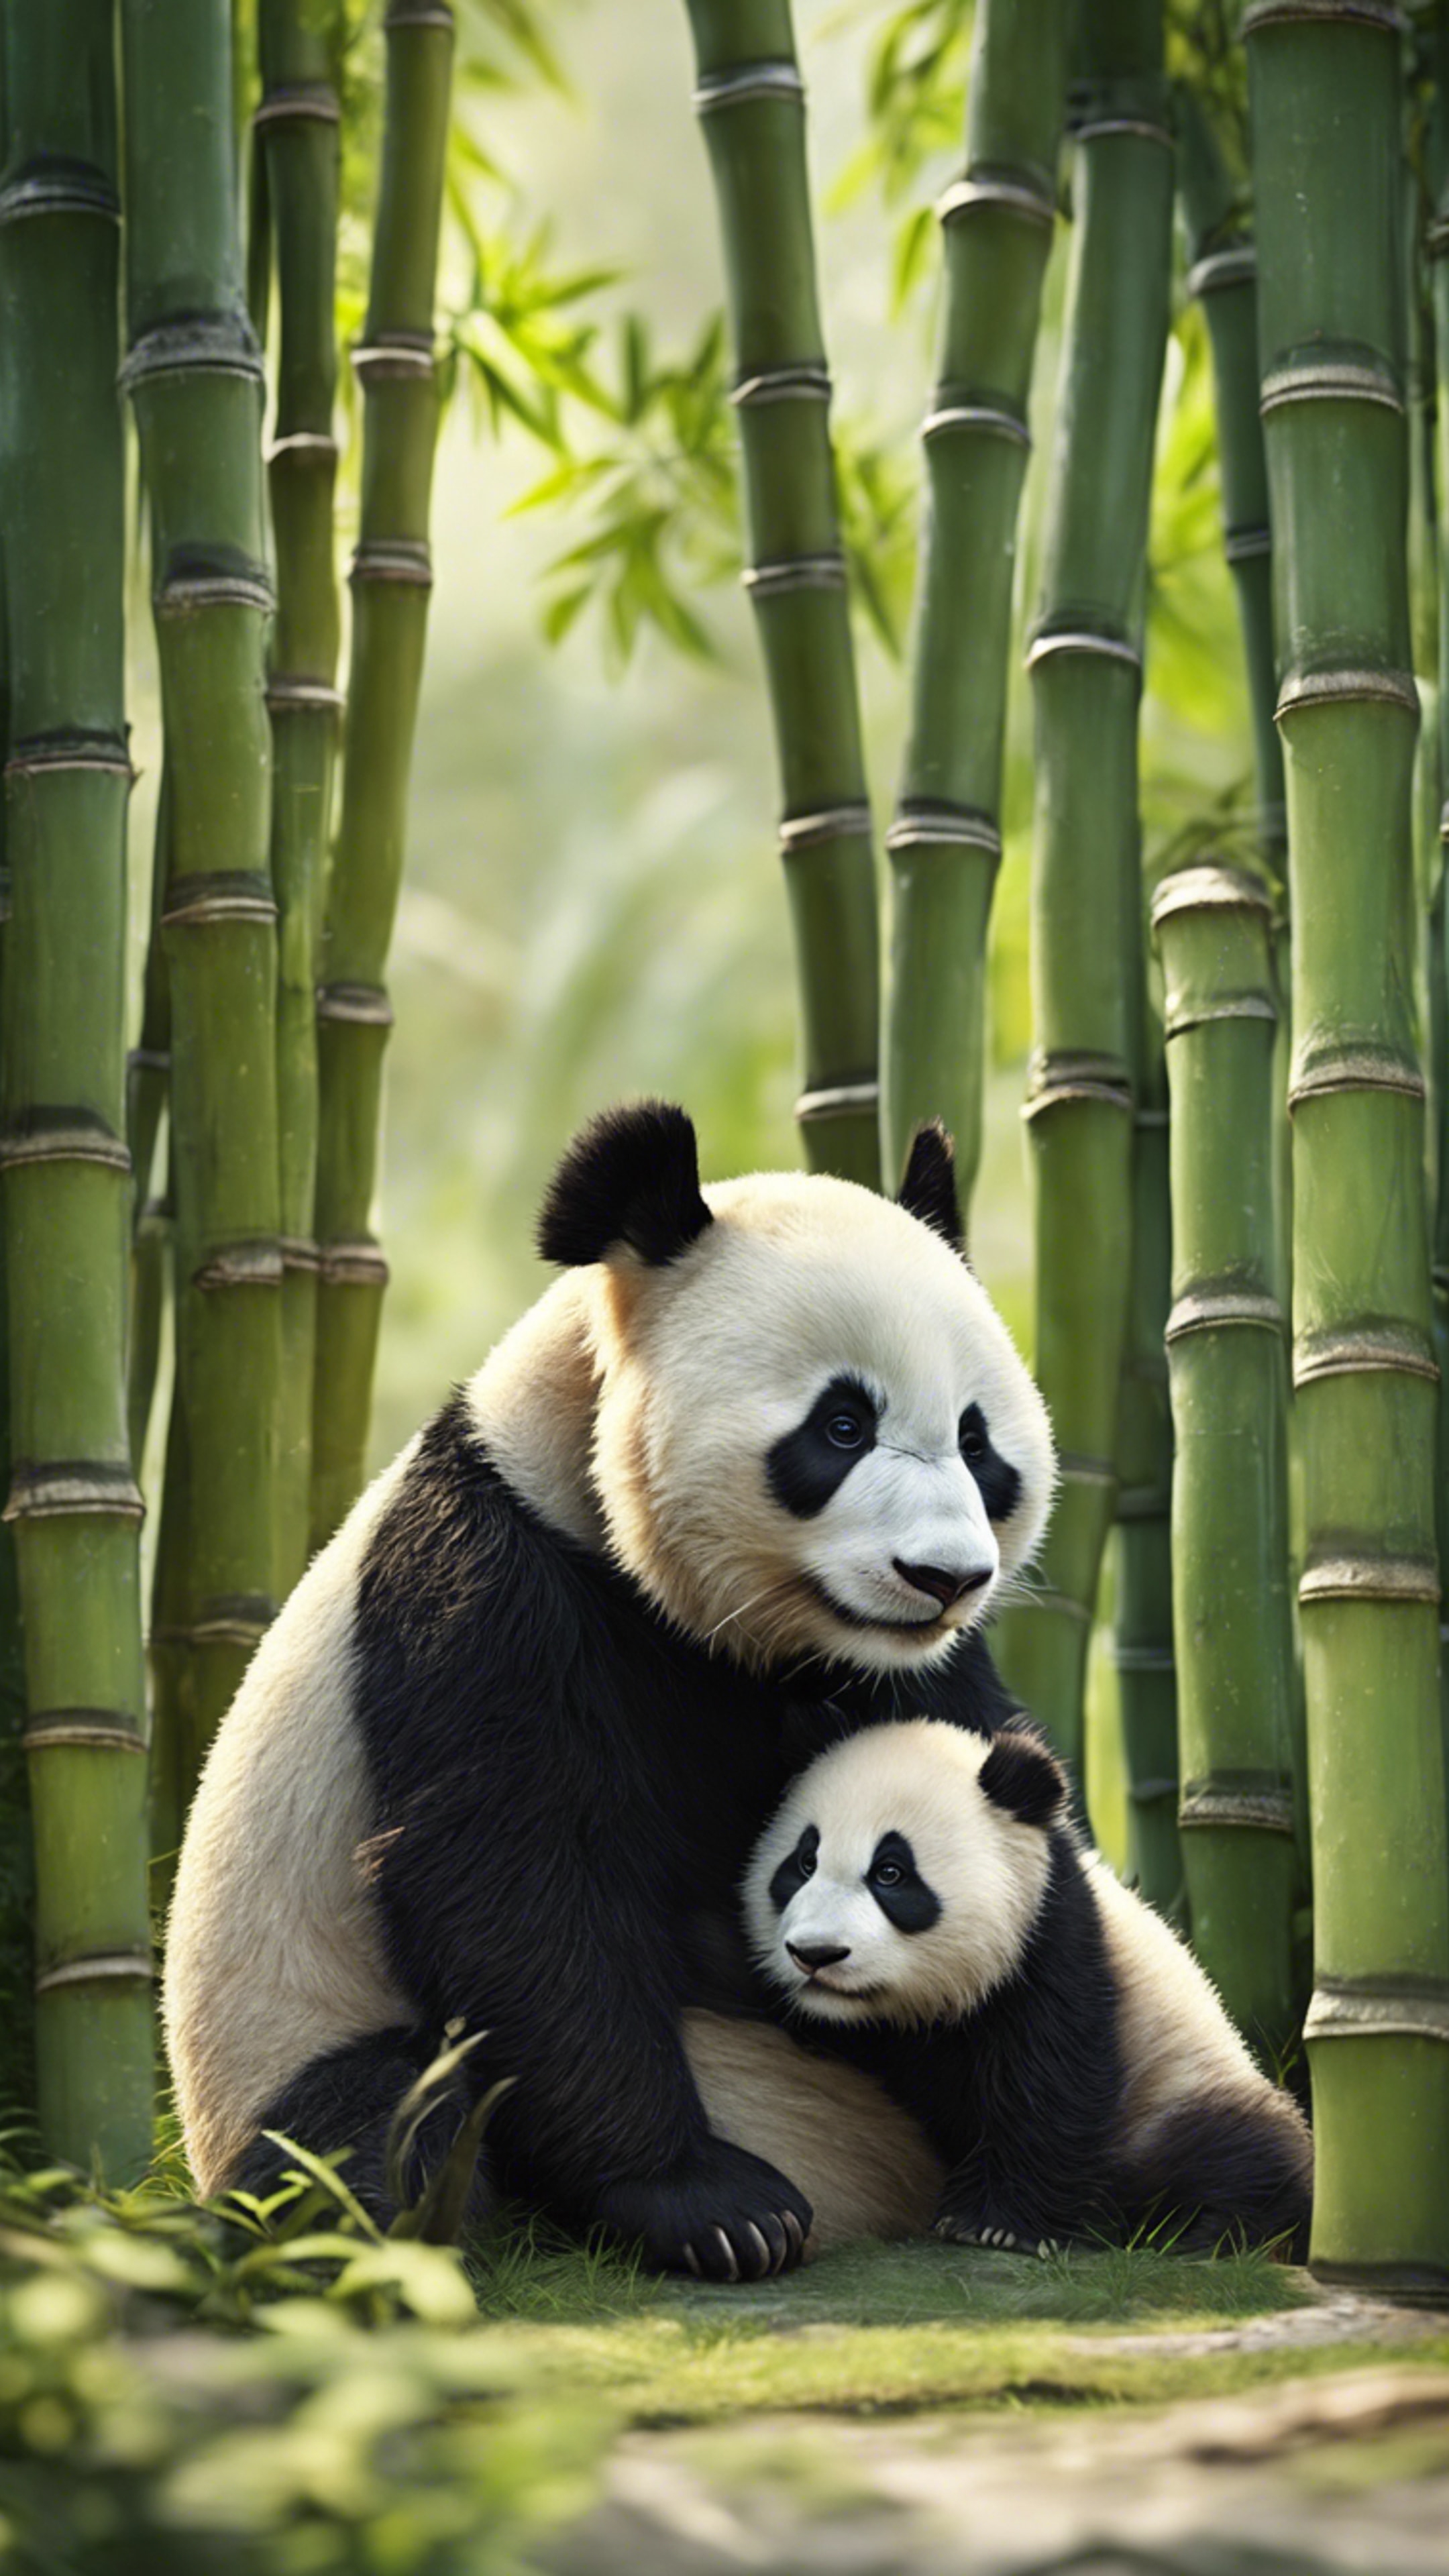 A mother panda teaching her cub to climb a bamboo tree in a tranquil jungle setting. Tapetai[bf956daca53d4d23a107]